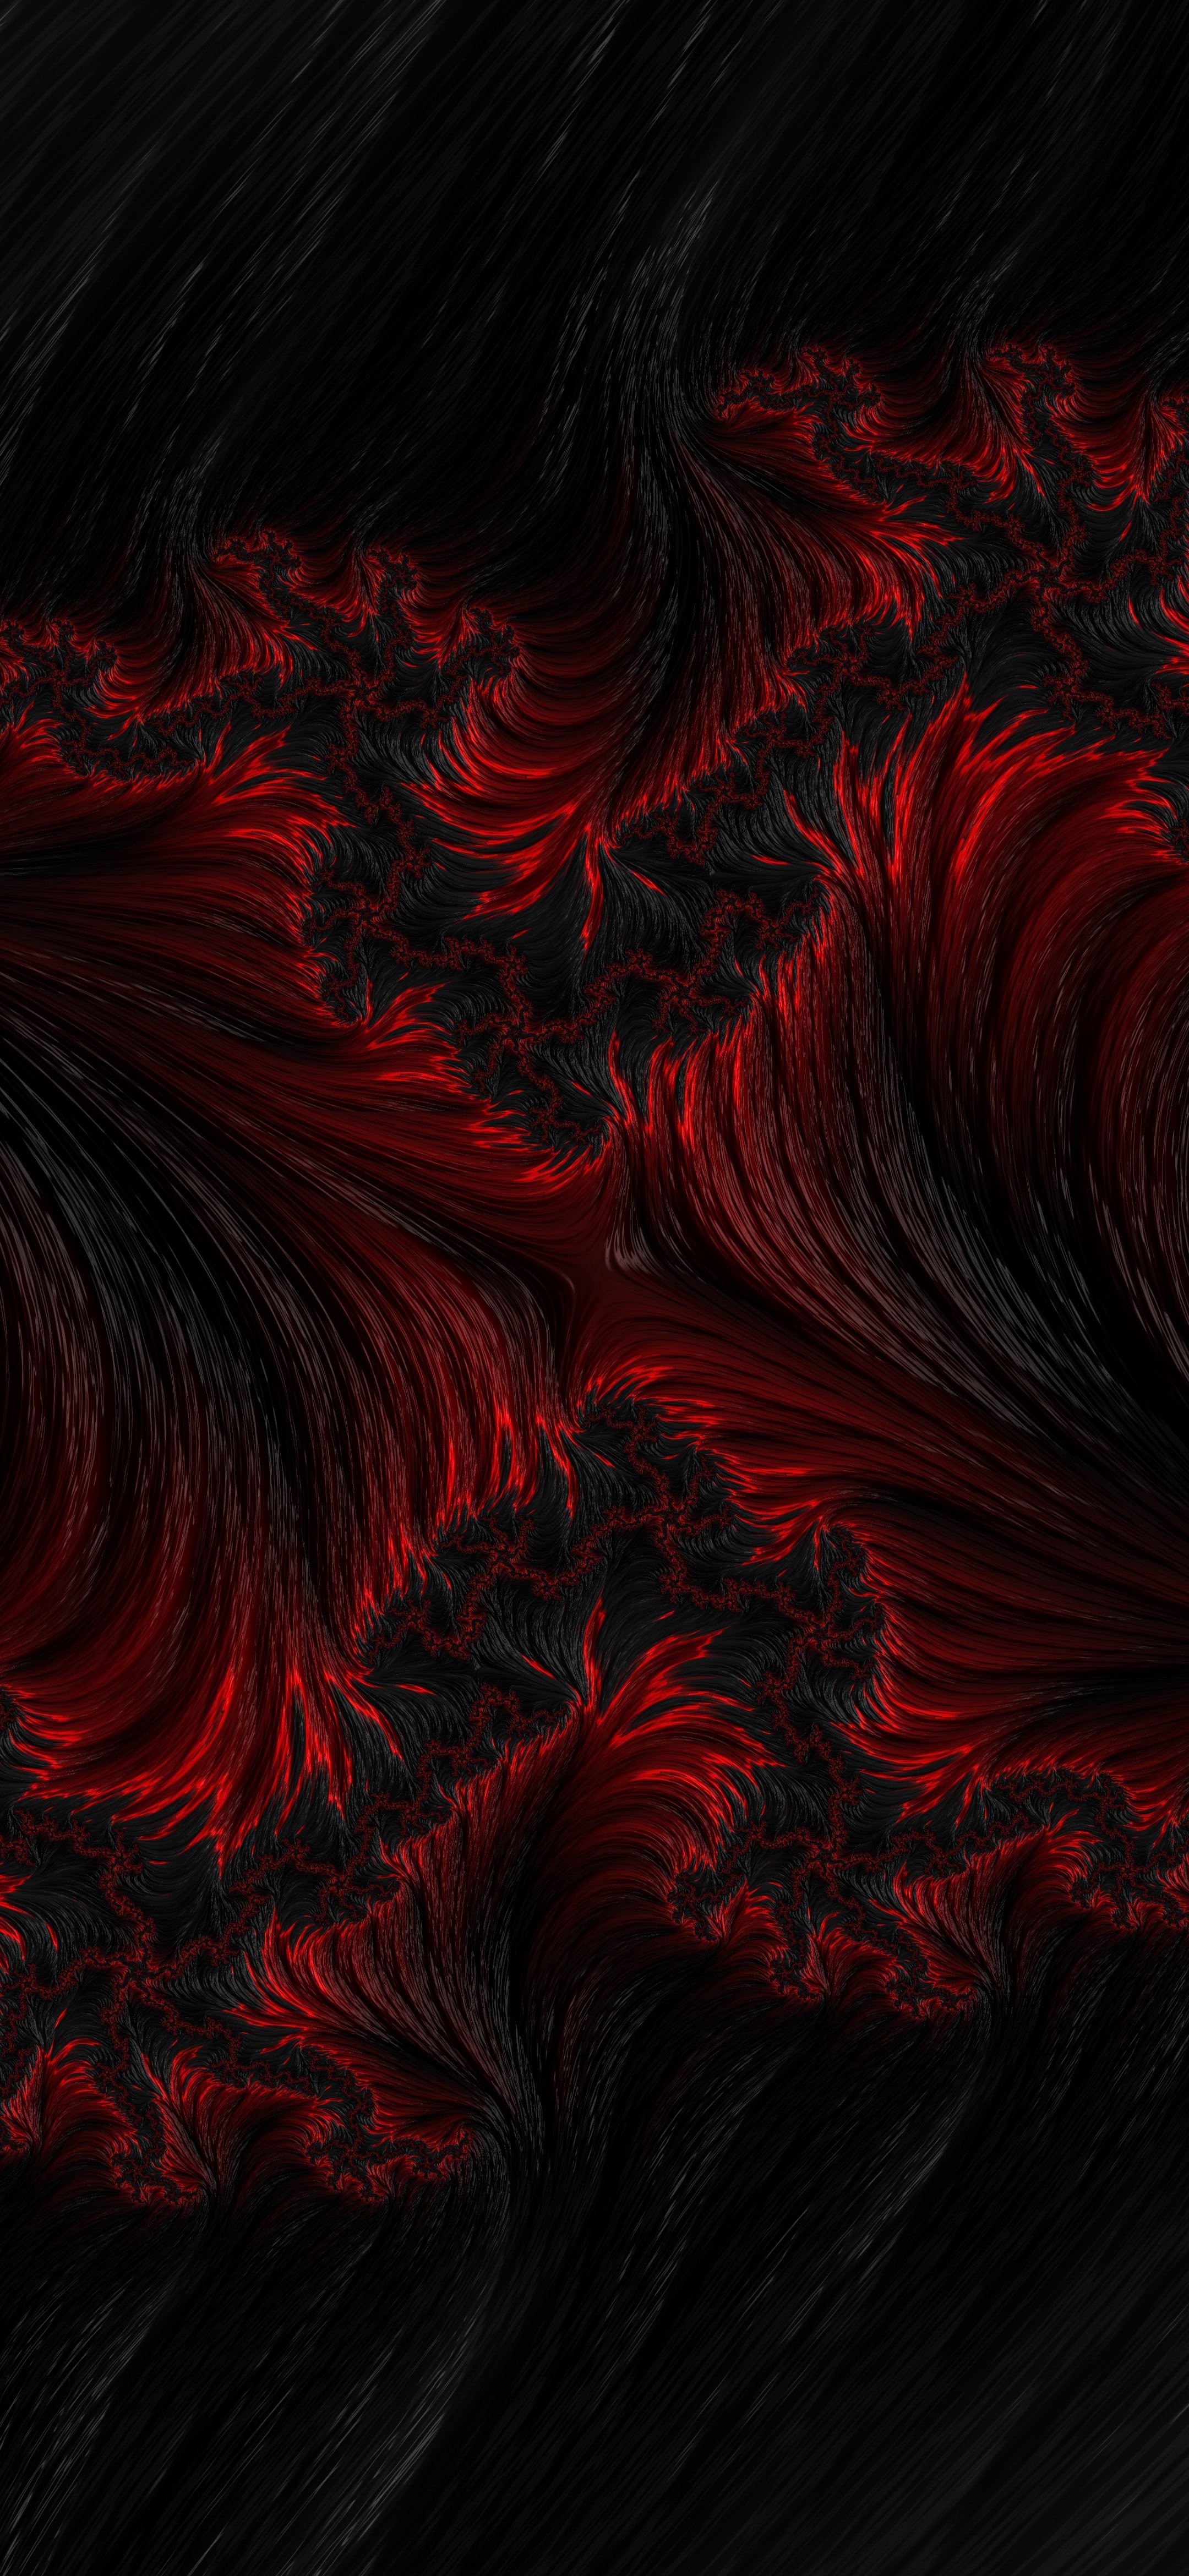 wavy, black, abstract, red, fractal